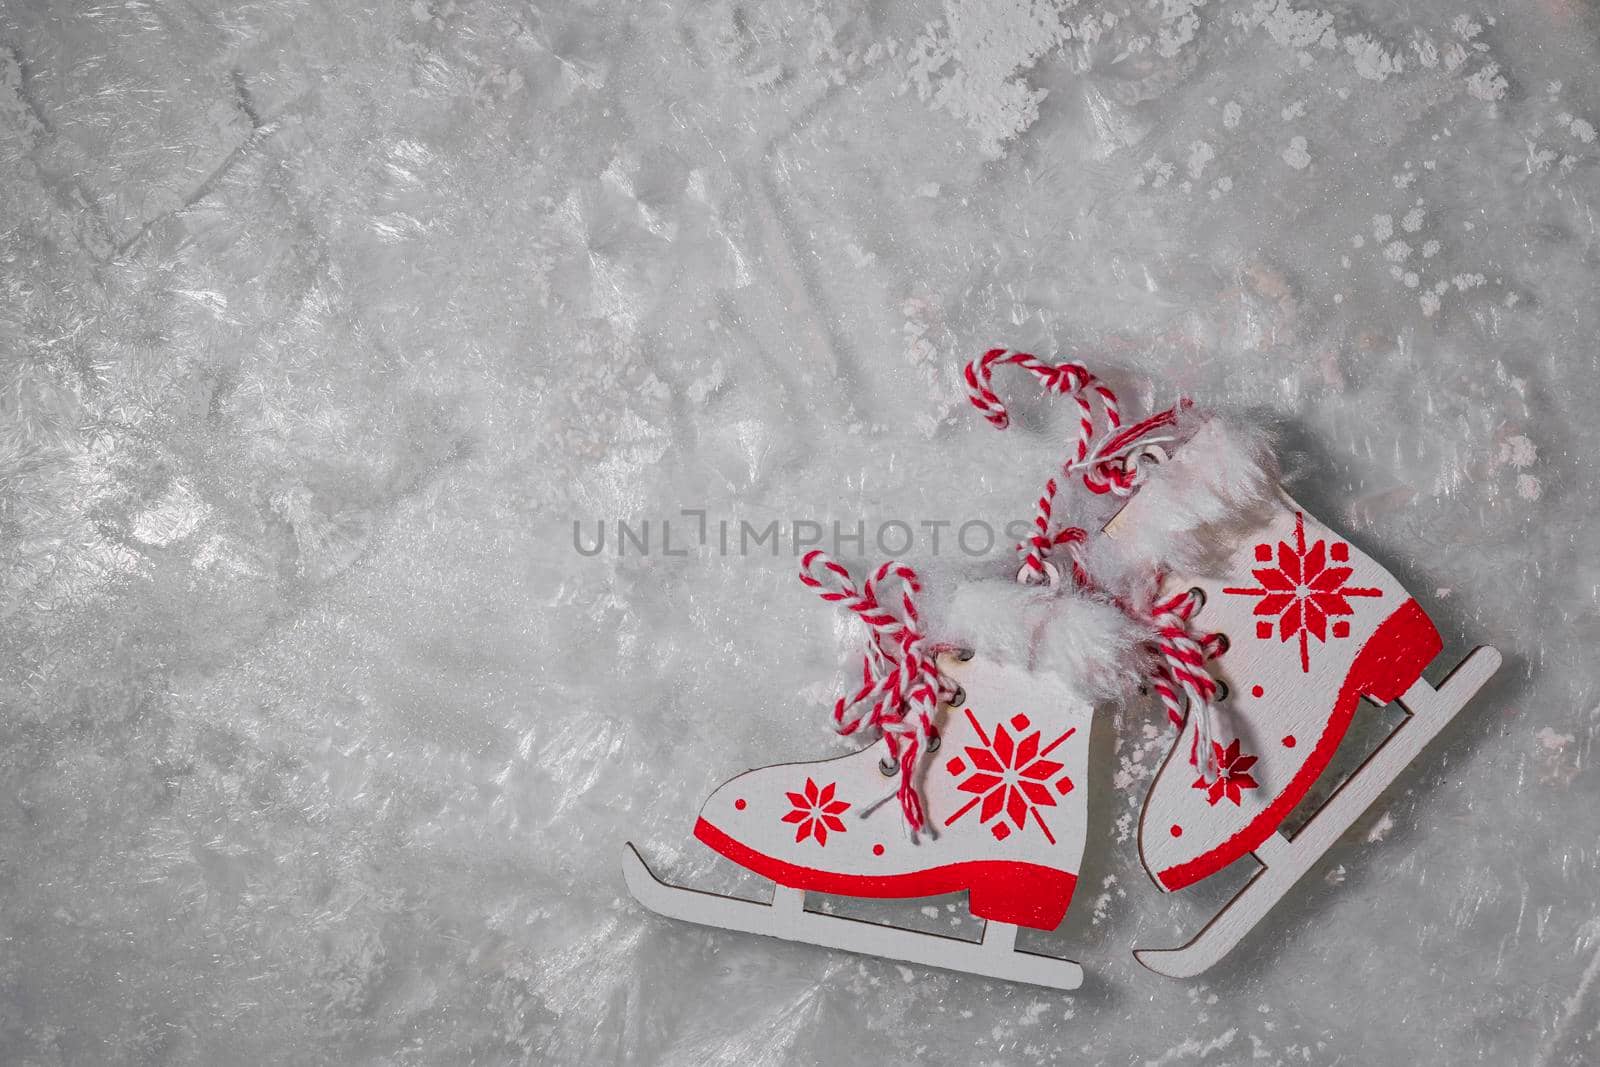 figurines of skates with a red pattern on frosty ice, sparkling frost or water crystals. winter sport or entertainment concept by Leoschka